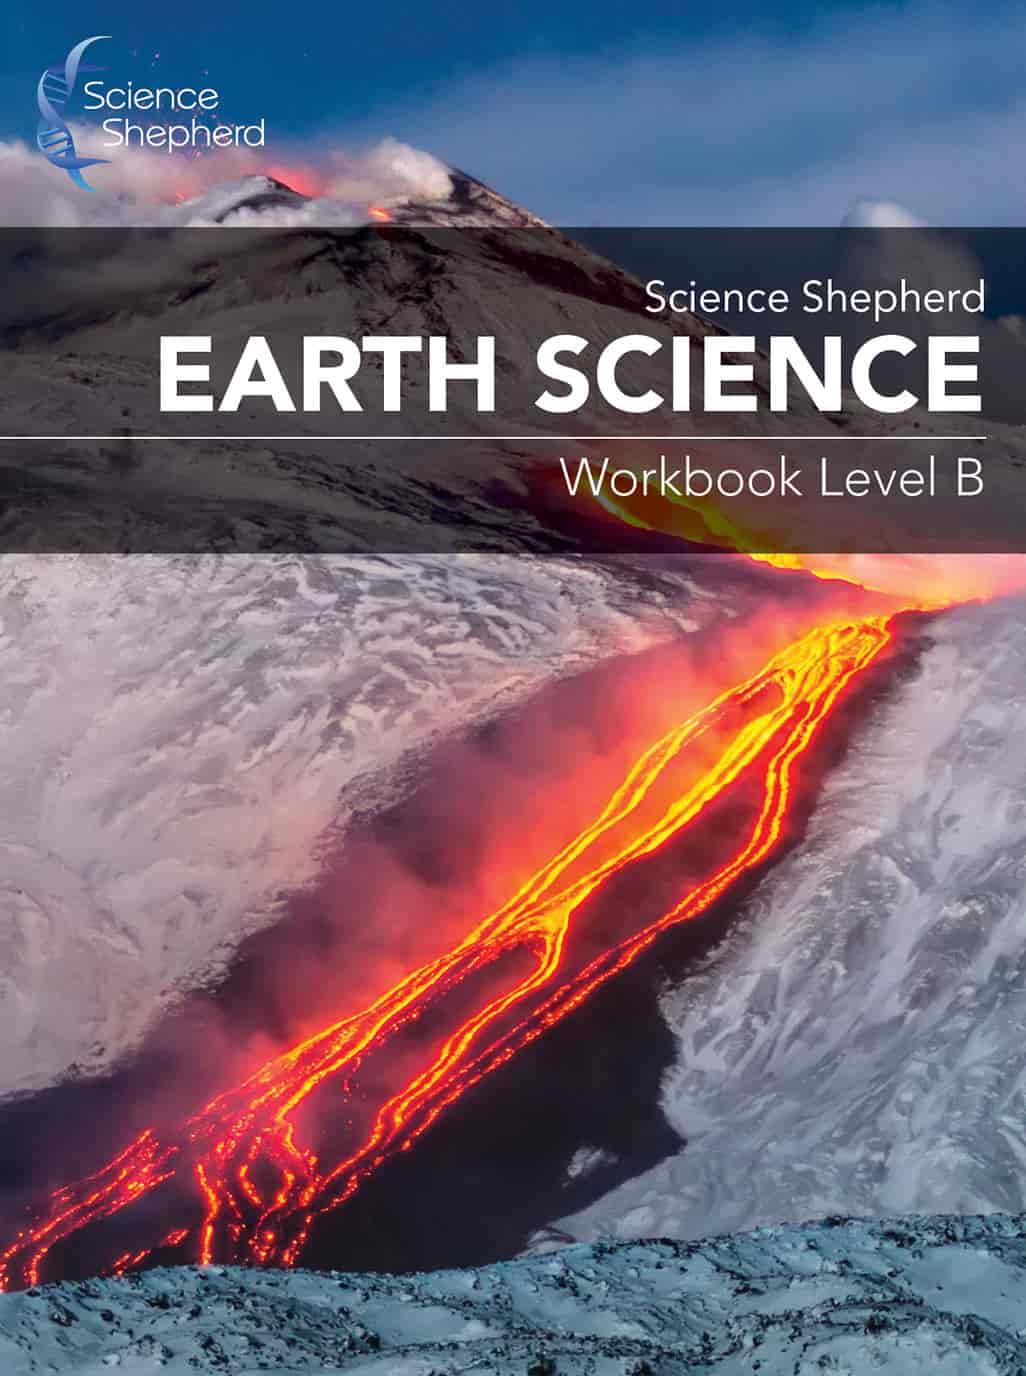 Homeschool earth science curriculum Workbook Level B cover showing volcano eruption.